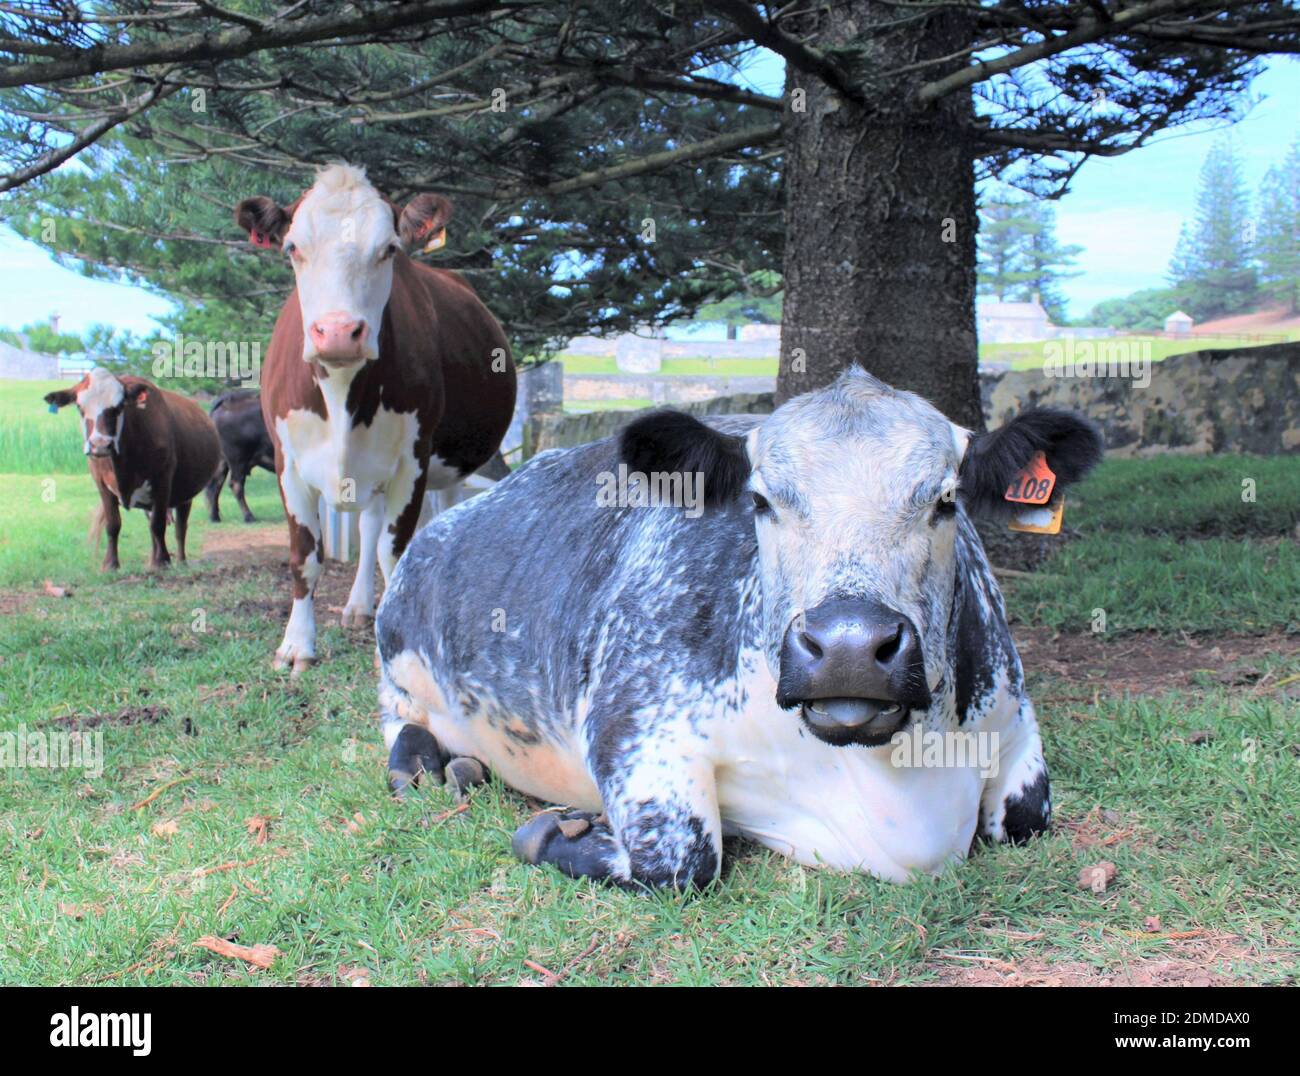 Norfolk Island. Norfolk Blue Breed of Cow, Open-grazing in the World Heritage Area, Kingston, beneath Endemic Norfolk island Pines. Stock Photo